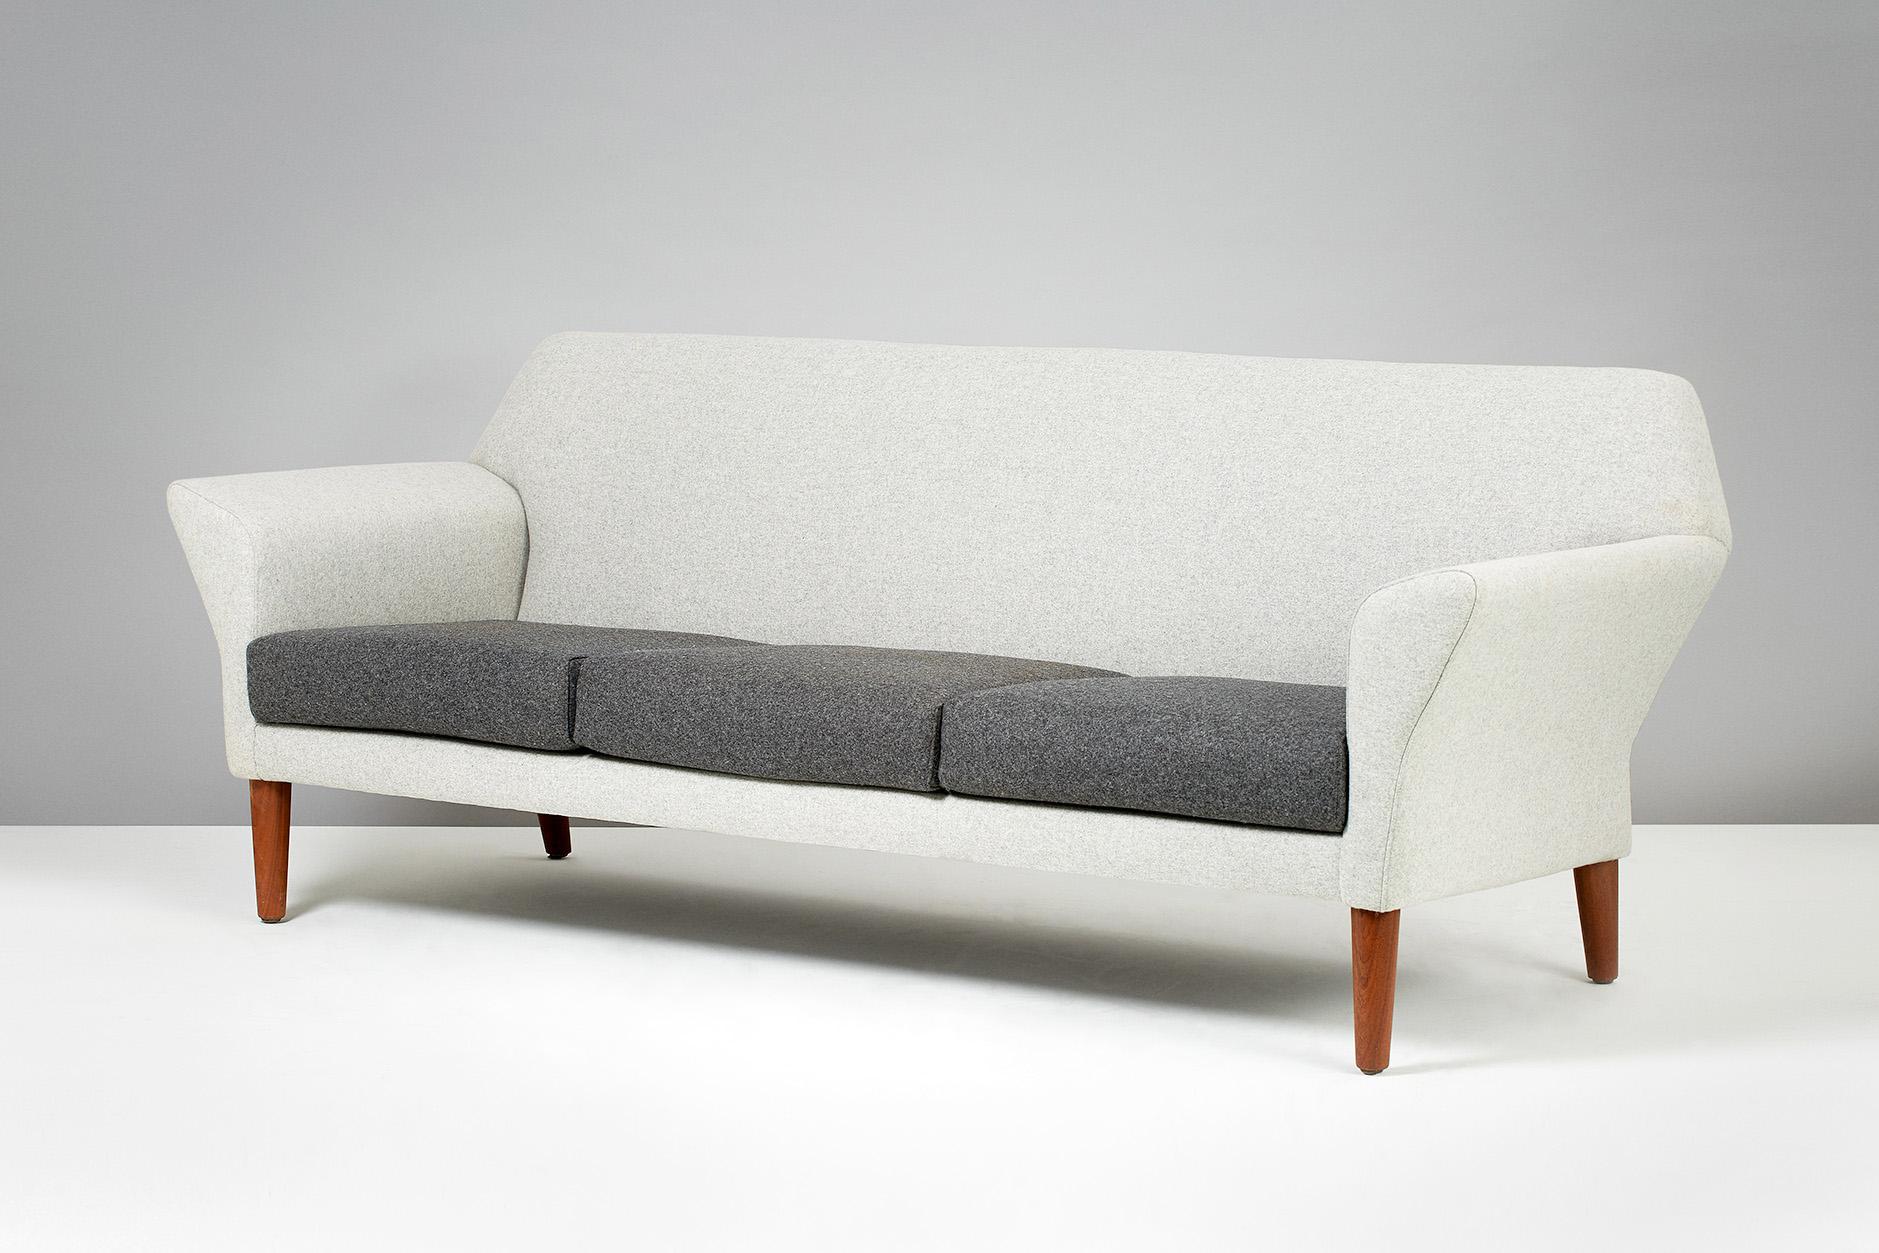 Sofa with teak legs produced by master cabinetmaker Willy Beck. New upholstery in two-tone Kvadrat wool fabric. 

H: 78cm / D: 80cm / W: 200cm